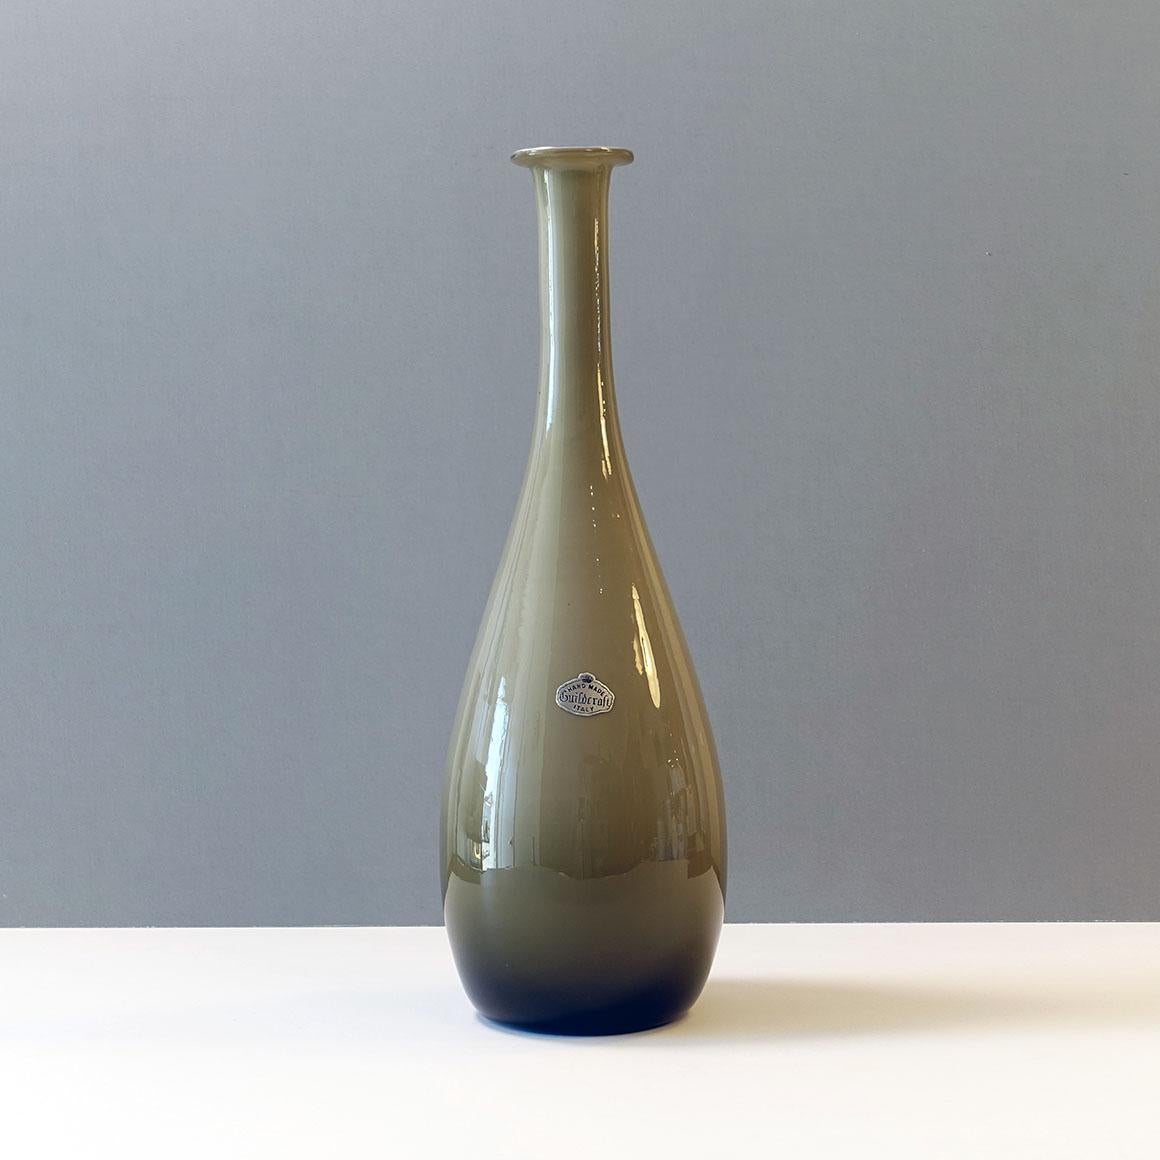 Guildcraft imported fine collectible mouth-blown, hand-finished cased art glass from Empoli, Italy. This beauty has a gray exterior and an internal layer of opaque light gray “Lattimo” glass. Stunning. A flat turned out lip and a full bulb shape to